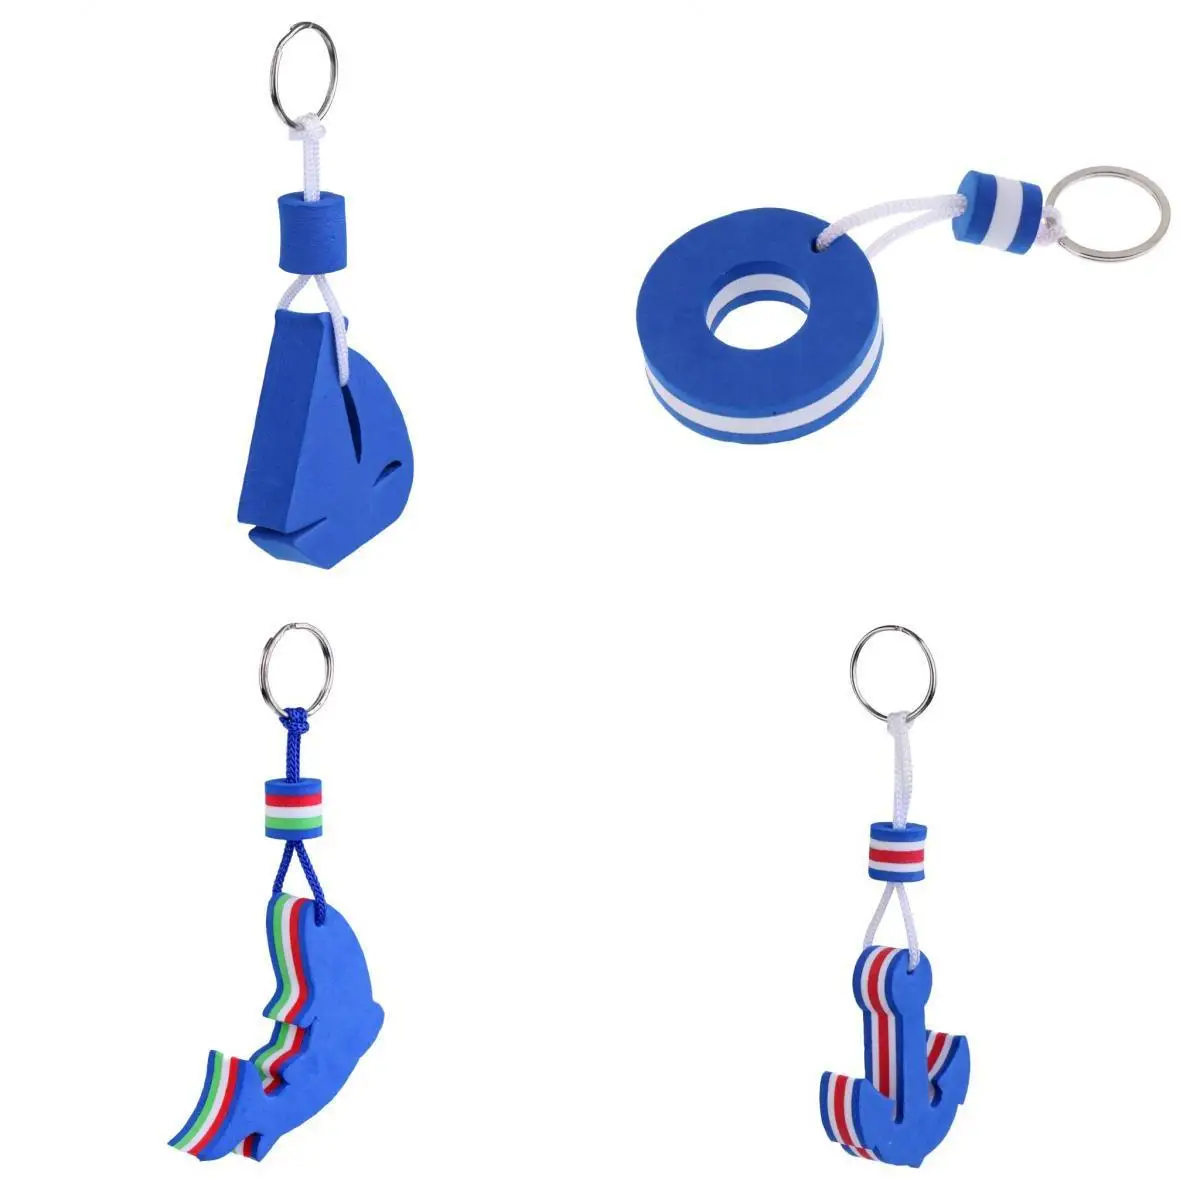 MagiDeal 4 Pieces Marine Outboard Floating Keyring Kayak Fishing- Sailing Ship, Dolphin Anchor and Buoy 